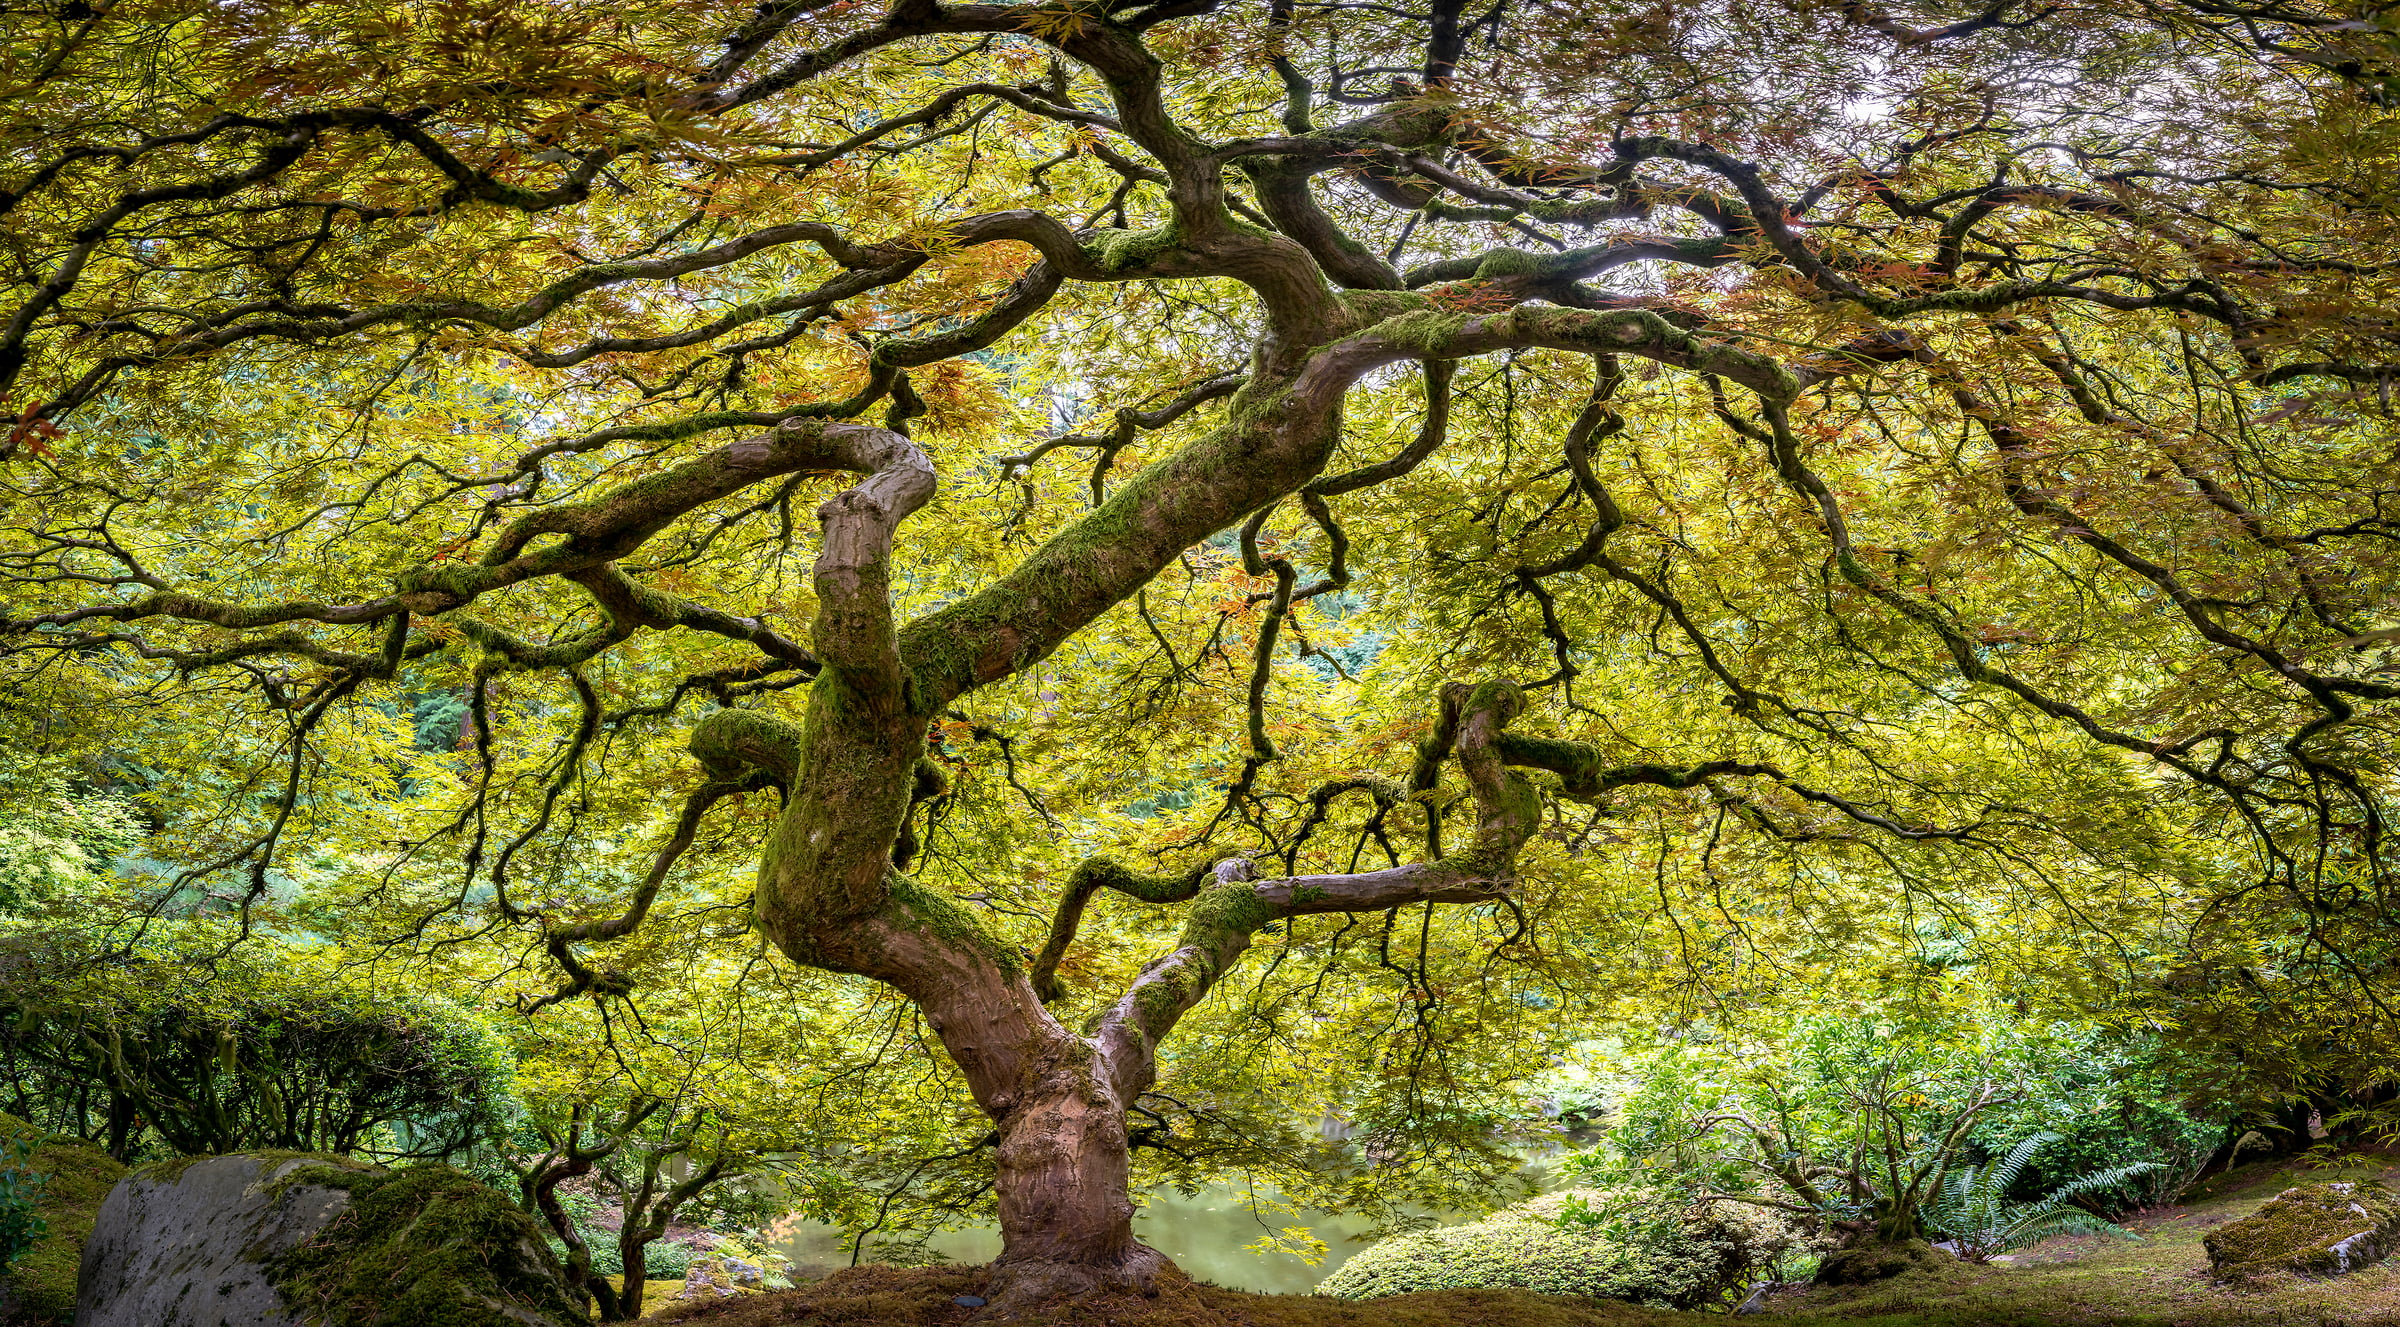 438 megapixels! A very high resolution, large-format VAST photo print of a Japanese maple tree; nature photo created by Justin Katz in the Portland Japanese Garden in Oregon.